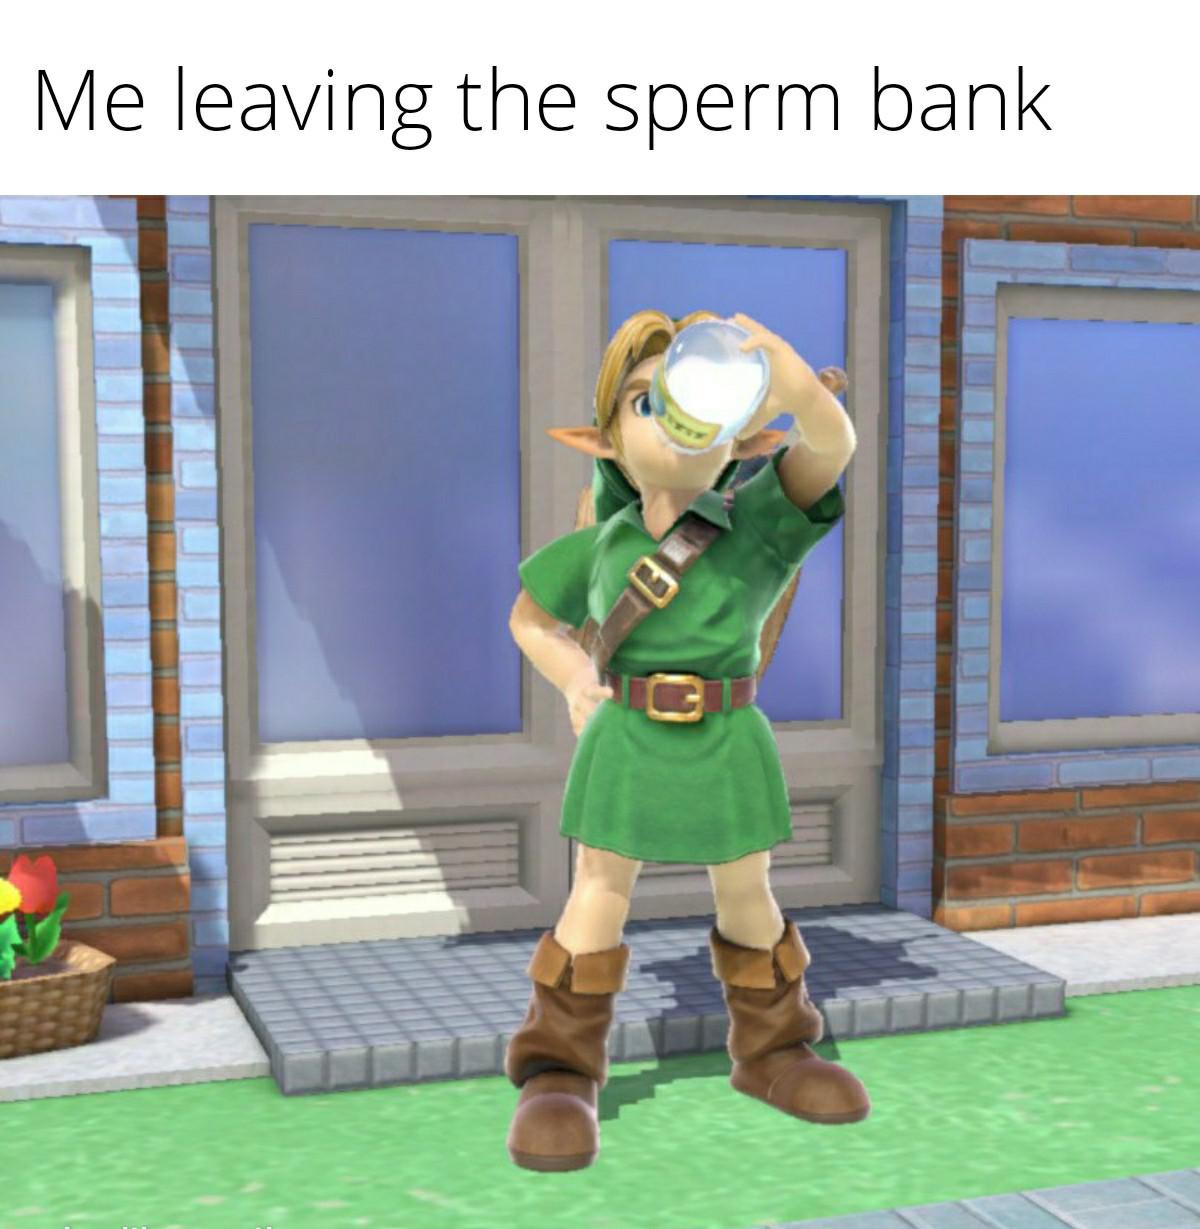 games - Me leaving the sperm bank G